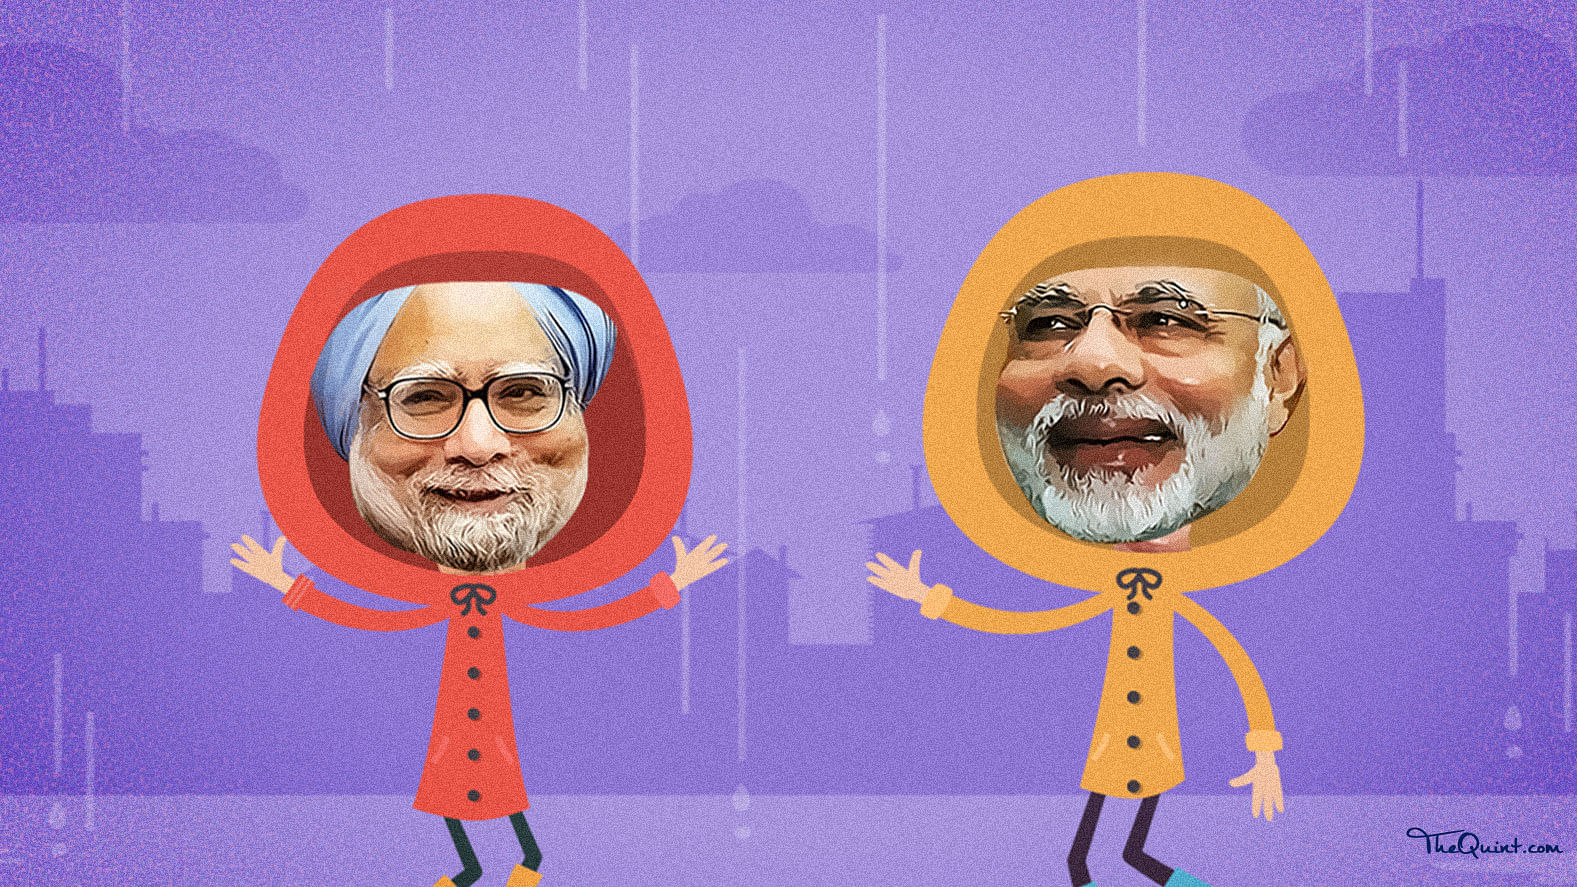 Prime Minister Narendra Modi’s ‘raincoat’ remark has been on the receiving end of a lot of criticism. (Photo: <b>The Quint</b>/Liju Joseph)